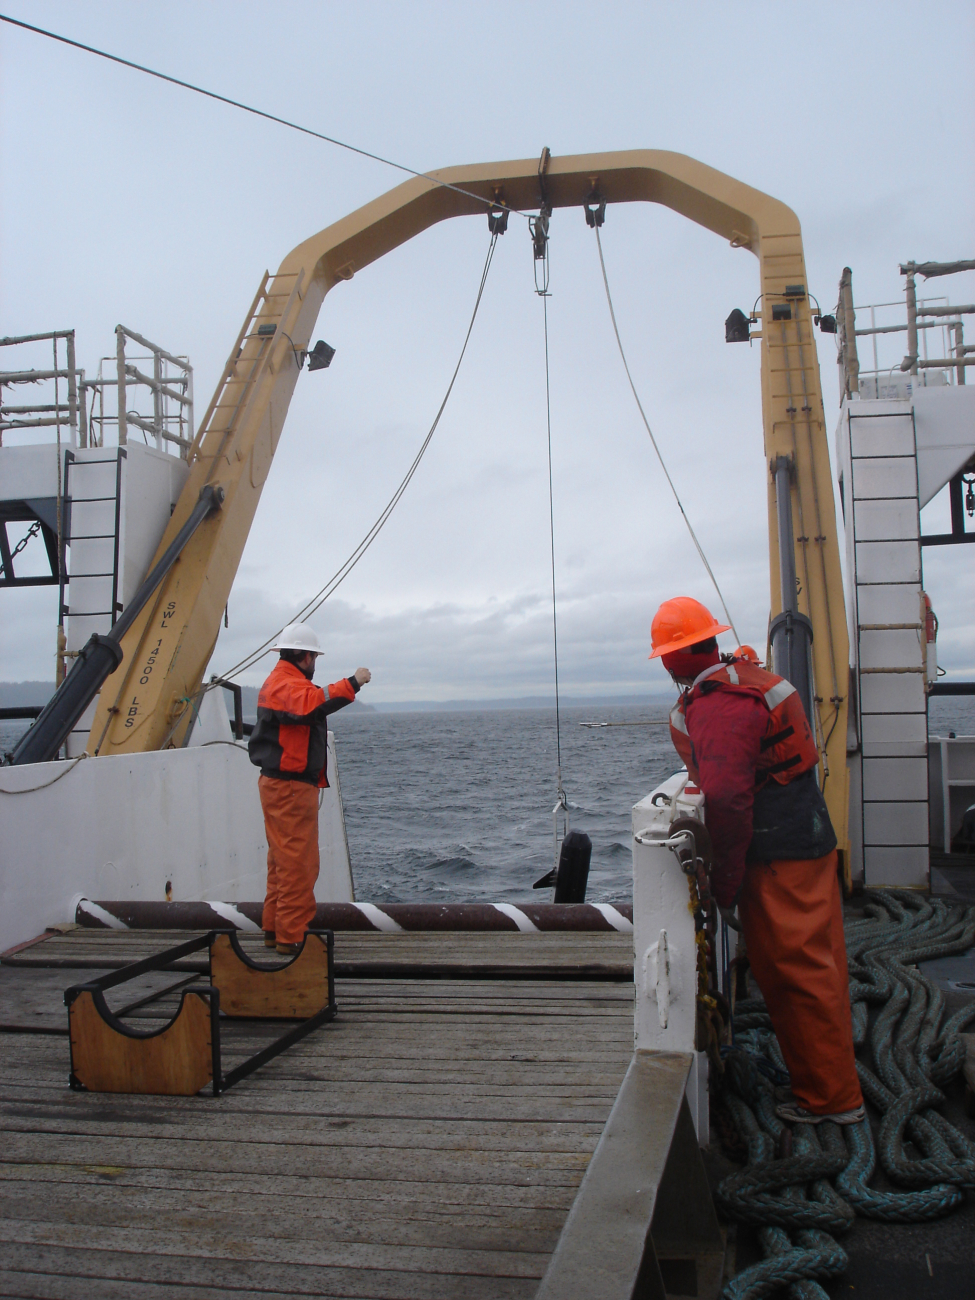 Deploying an oceanographic instrument off the stern